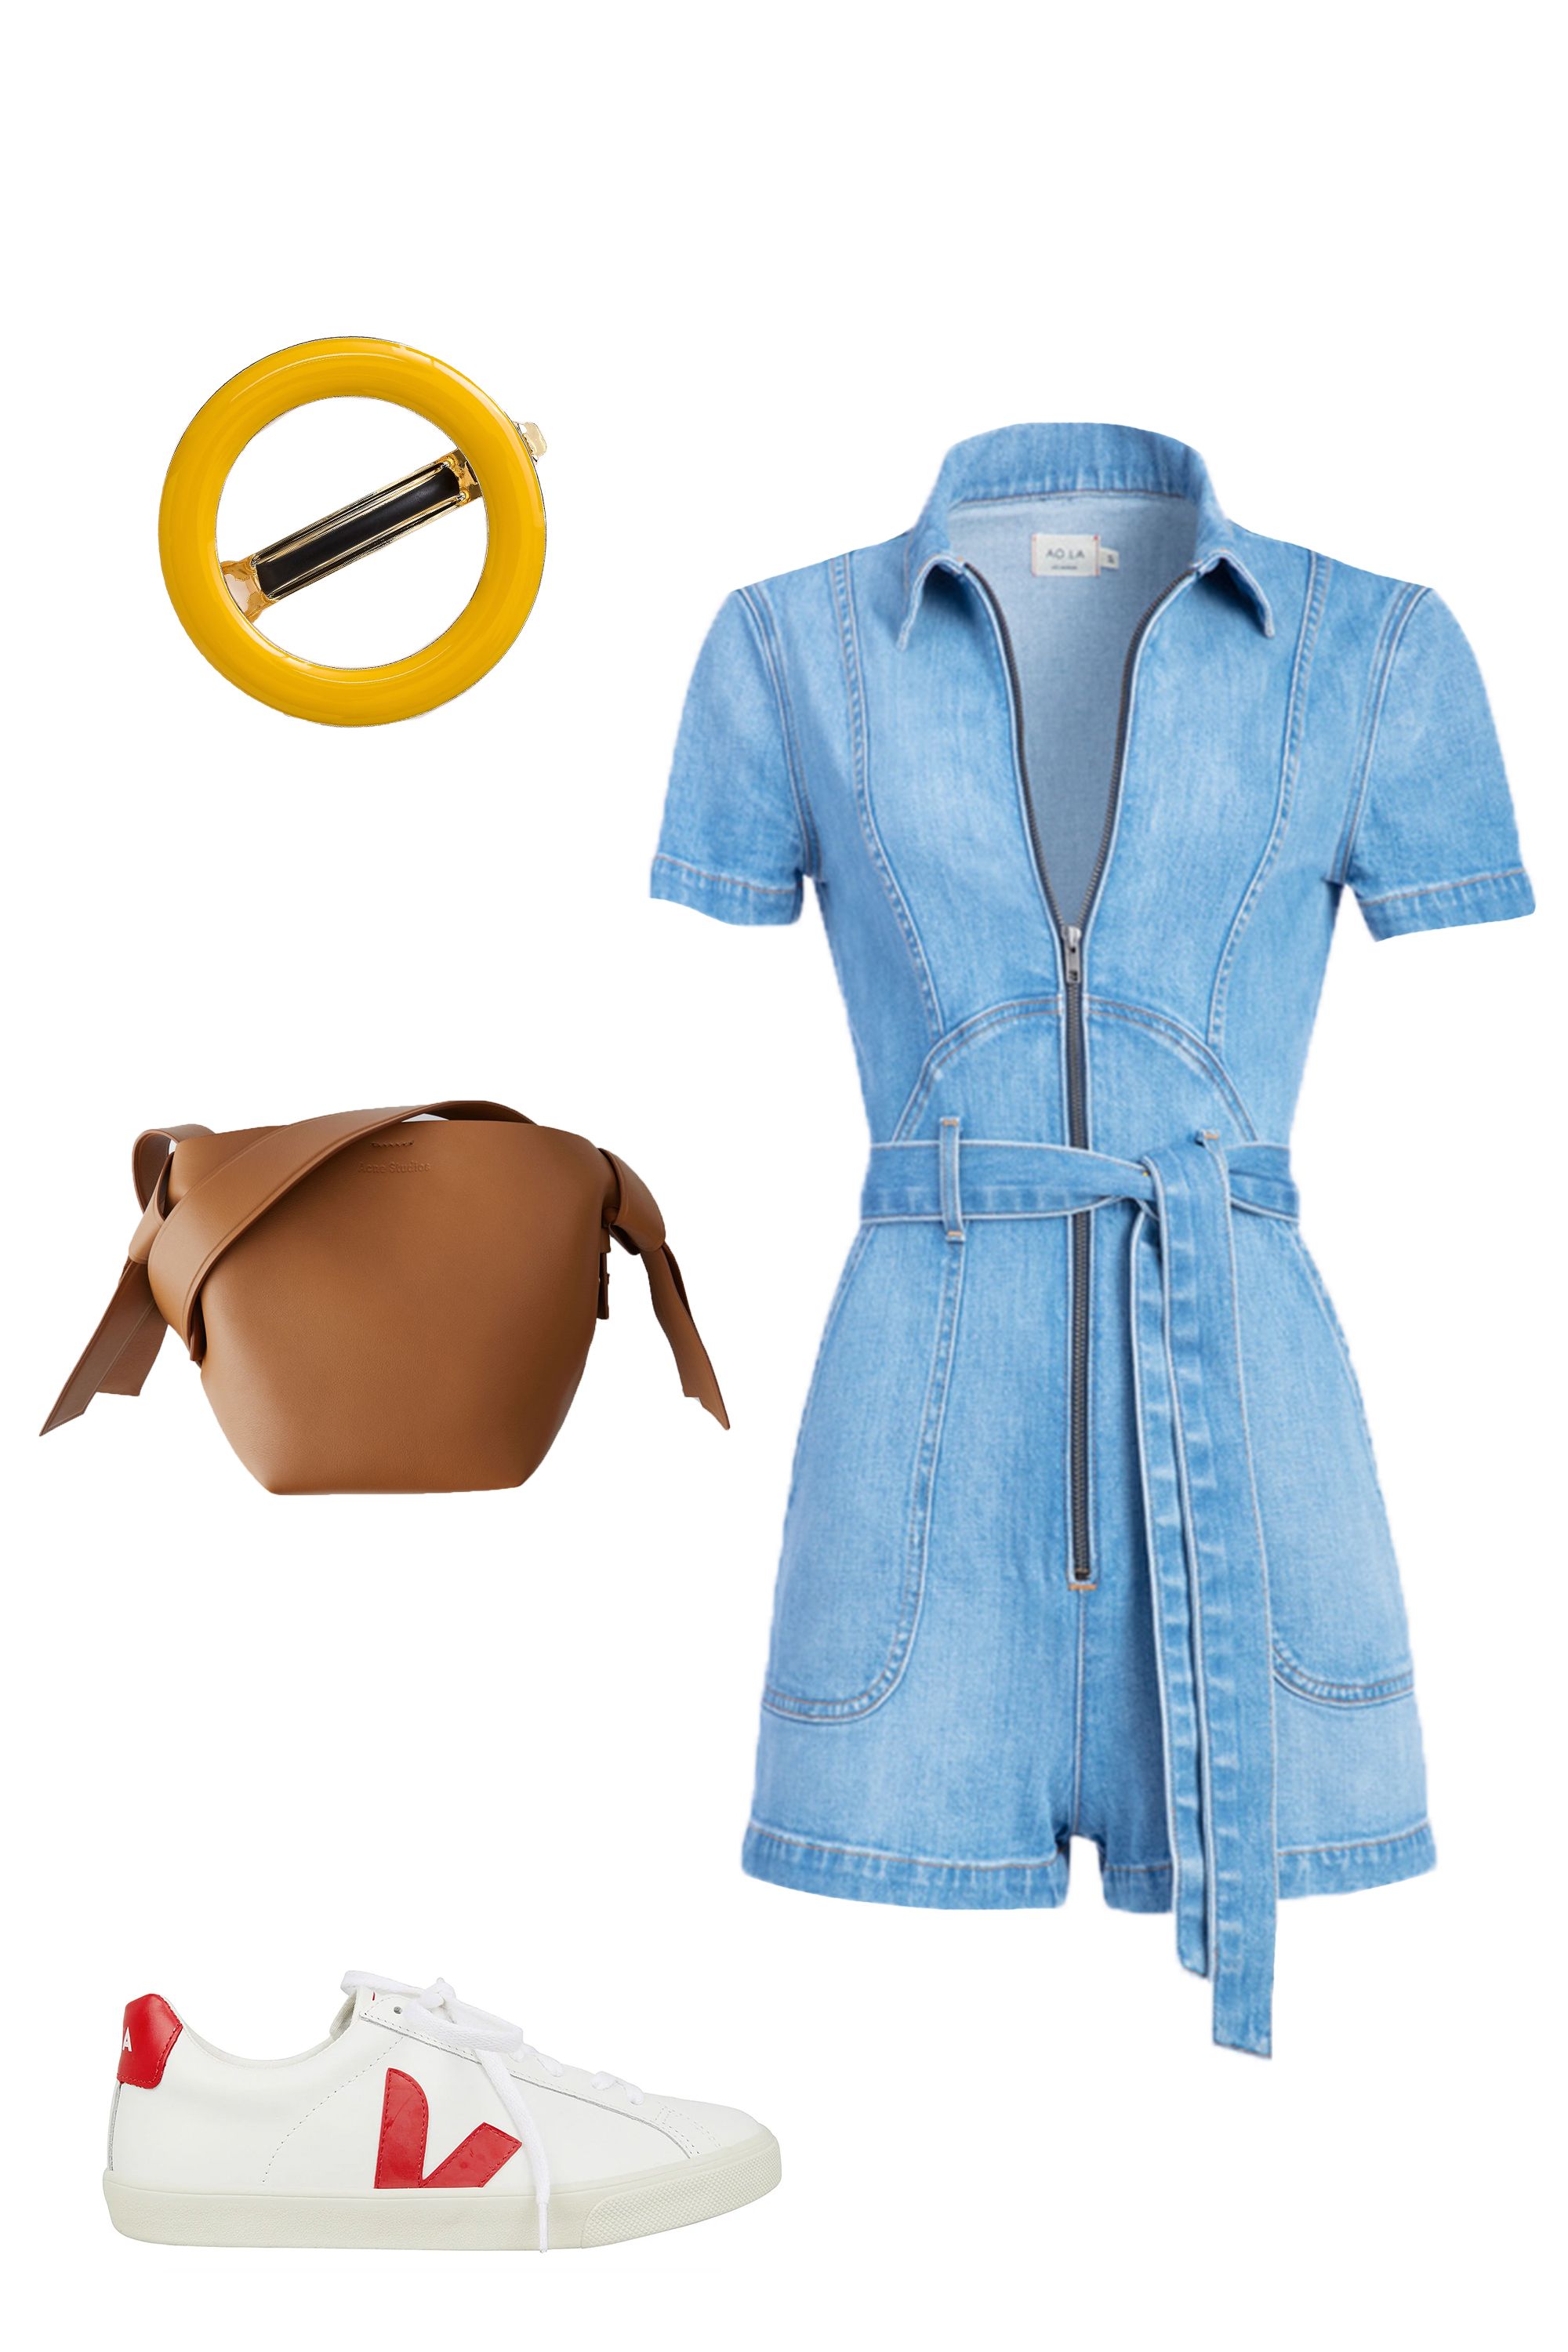 jean short romper outfit